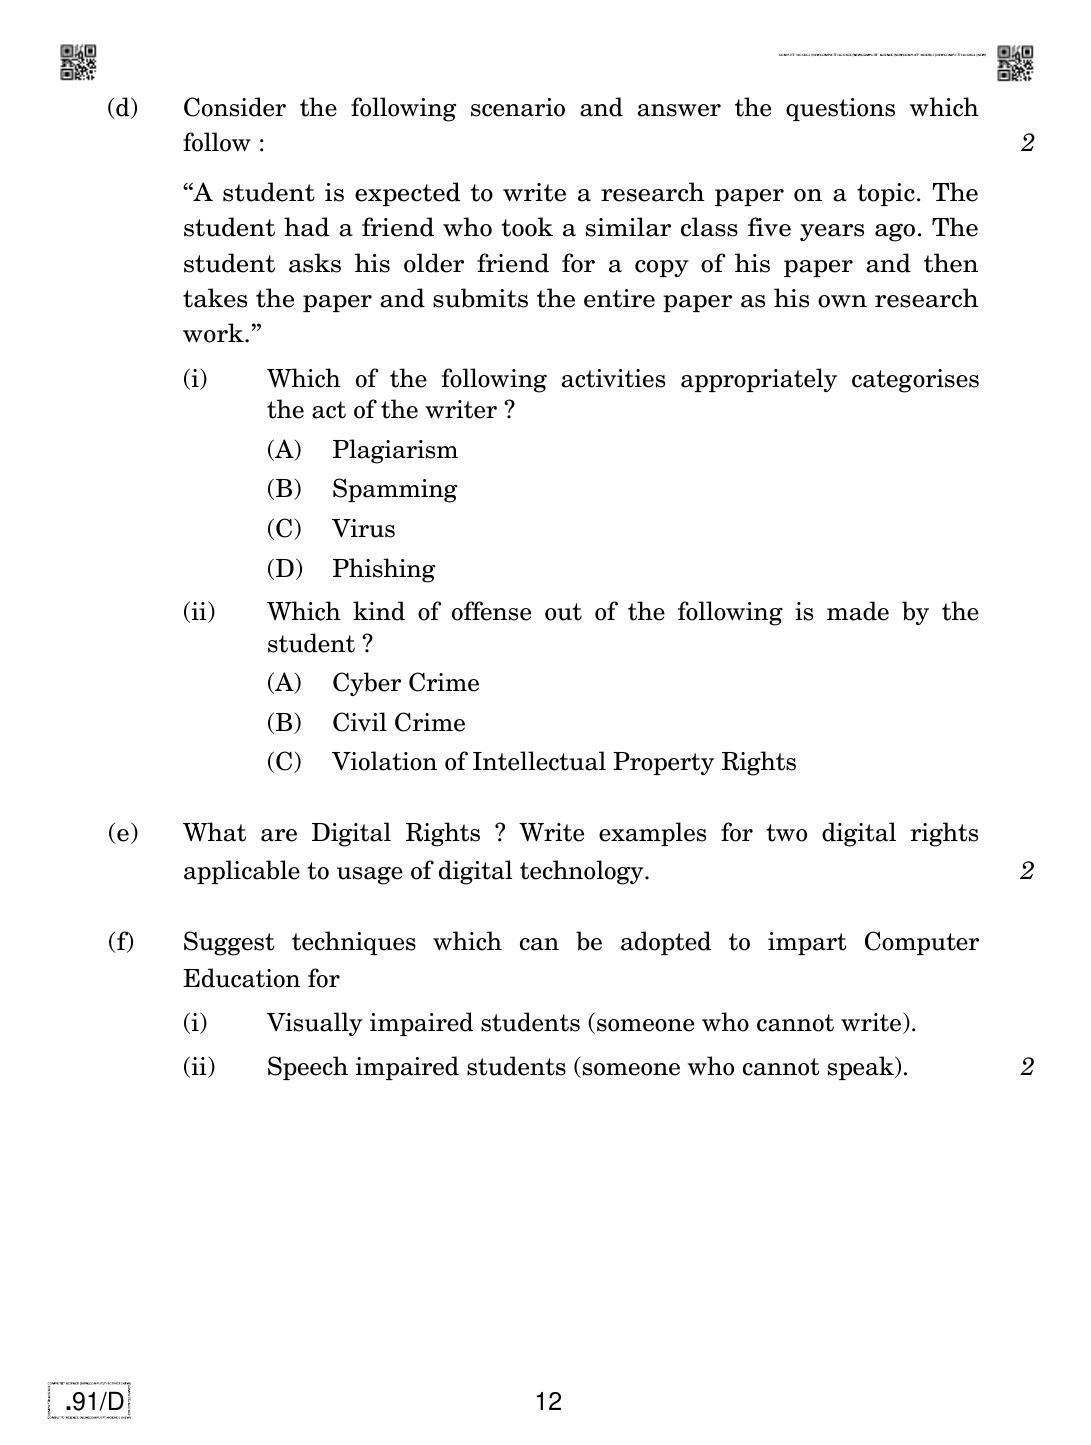 CBSE Class 12 CS 2020 Compartment Question Paper - Page 12